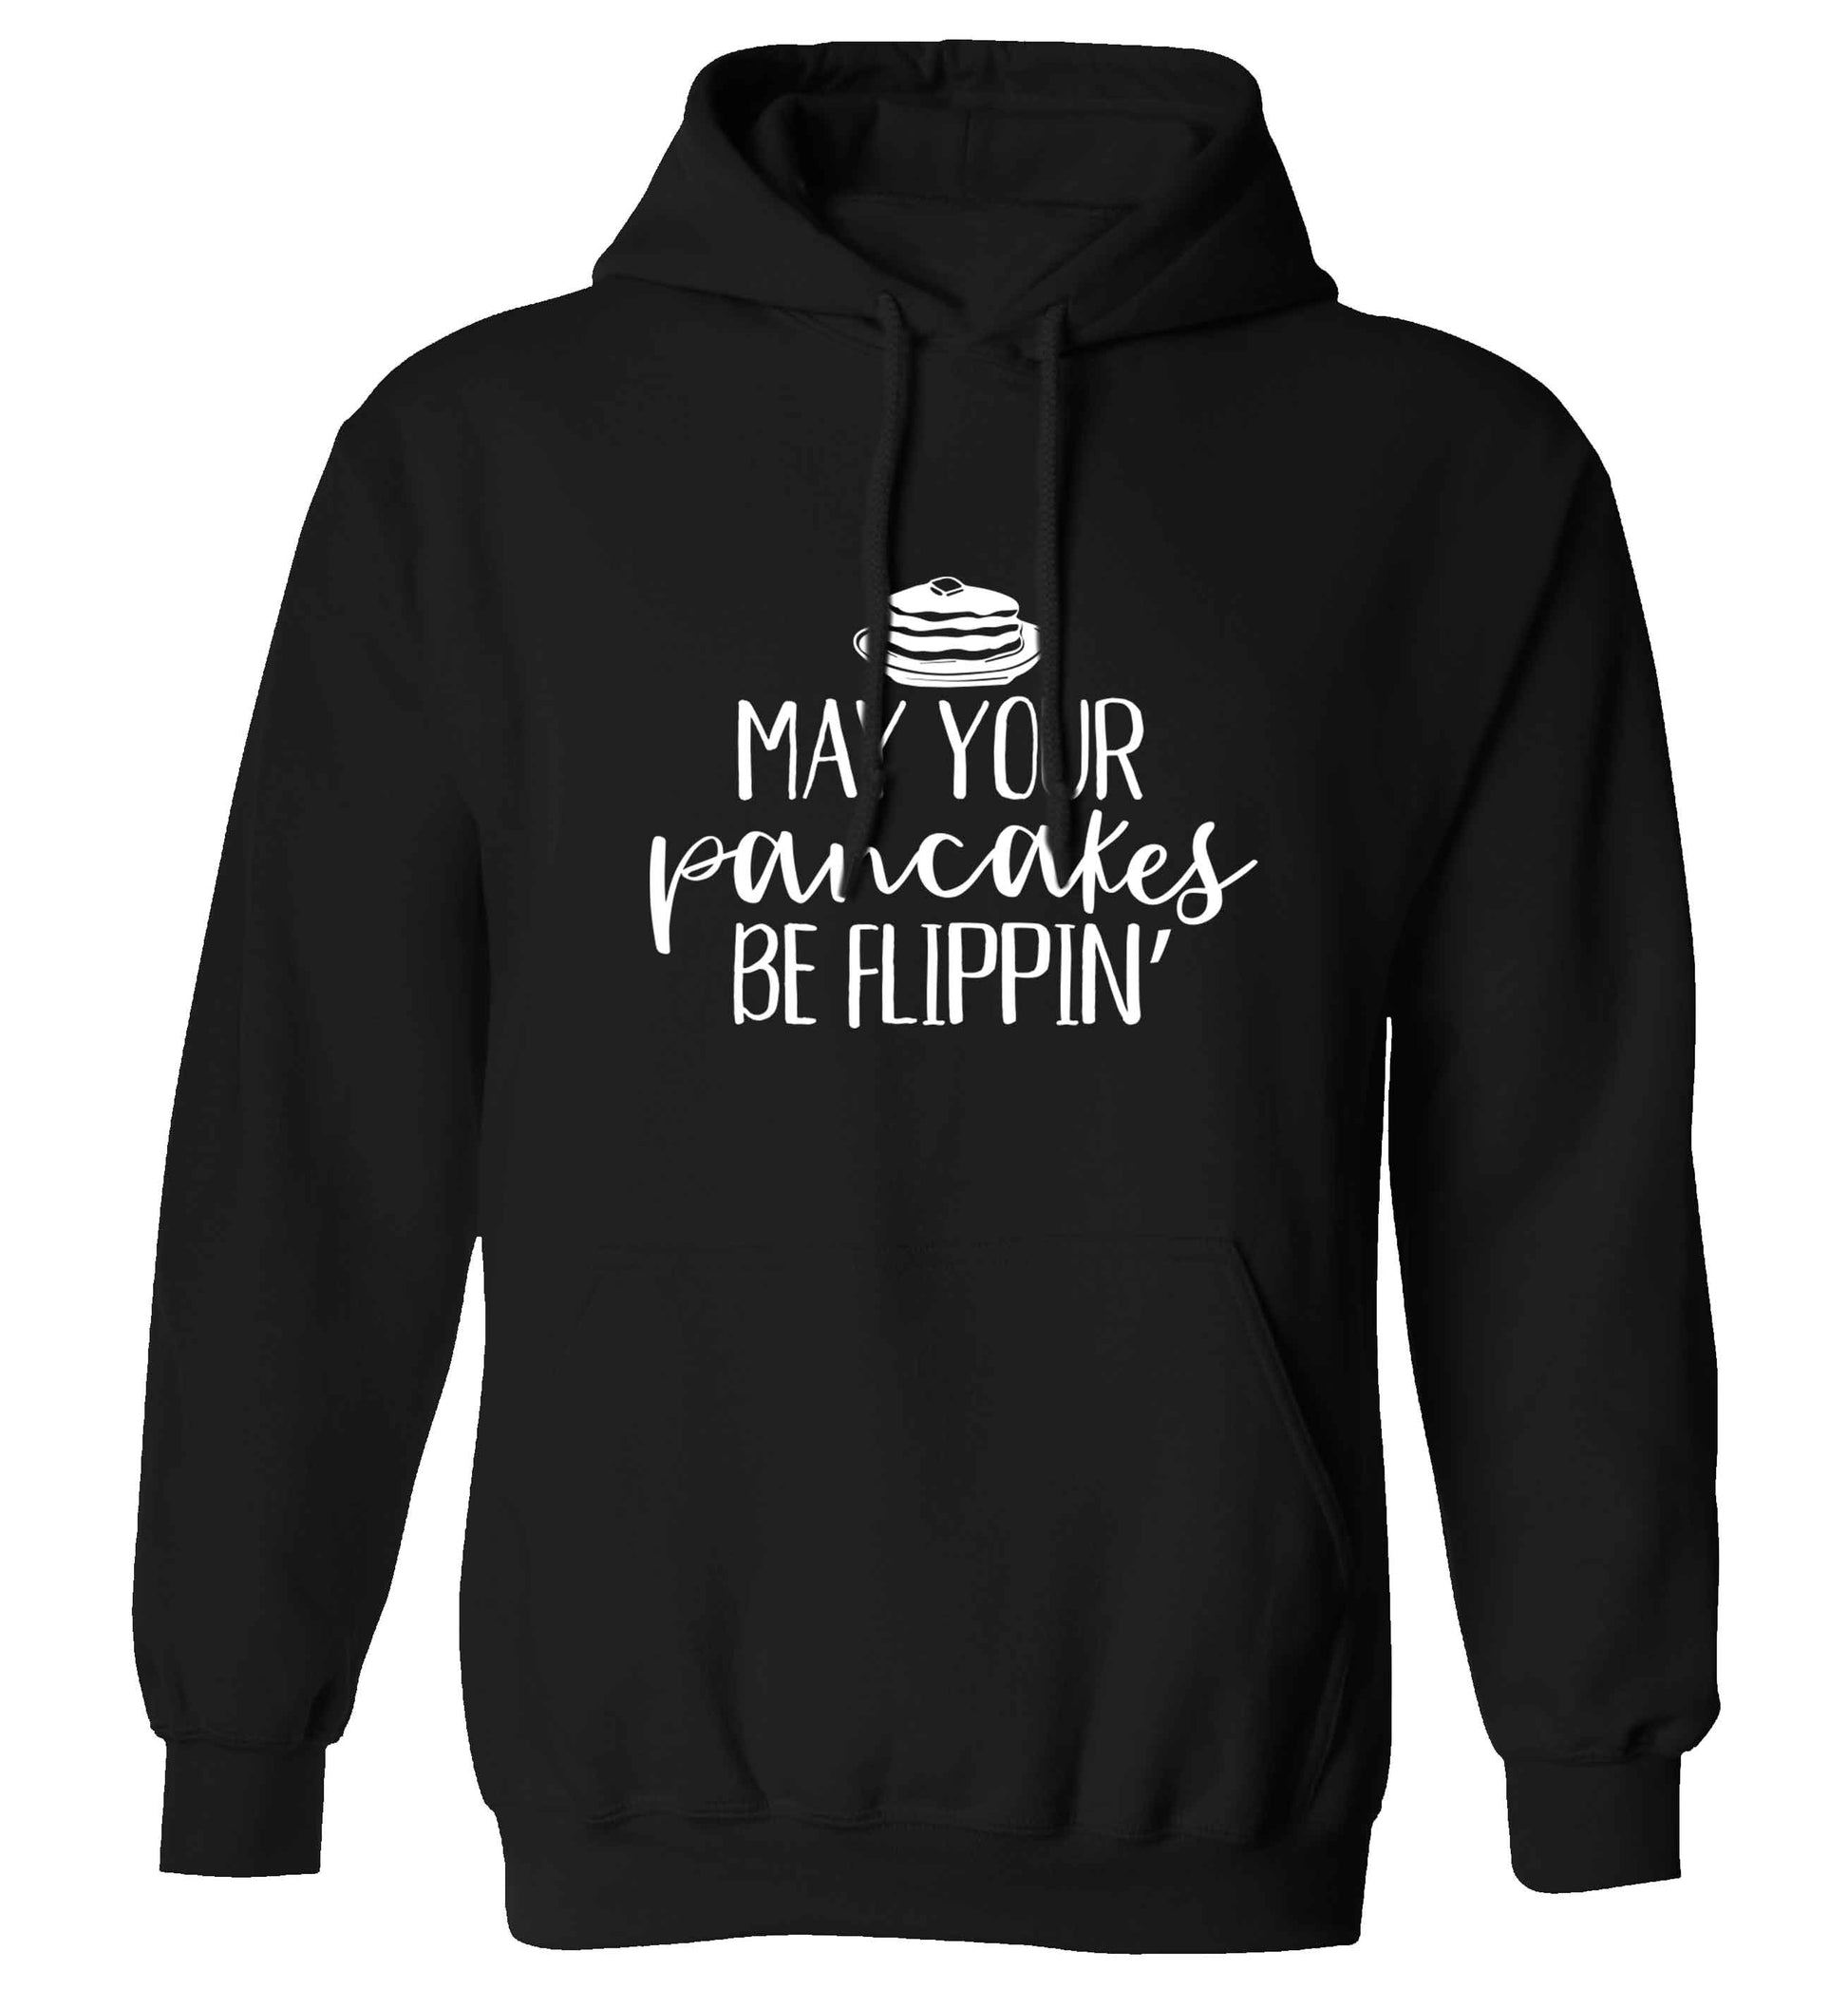 May your pancakes be flippin' adults unisex black hoodie 2XL